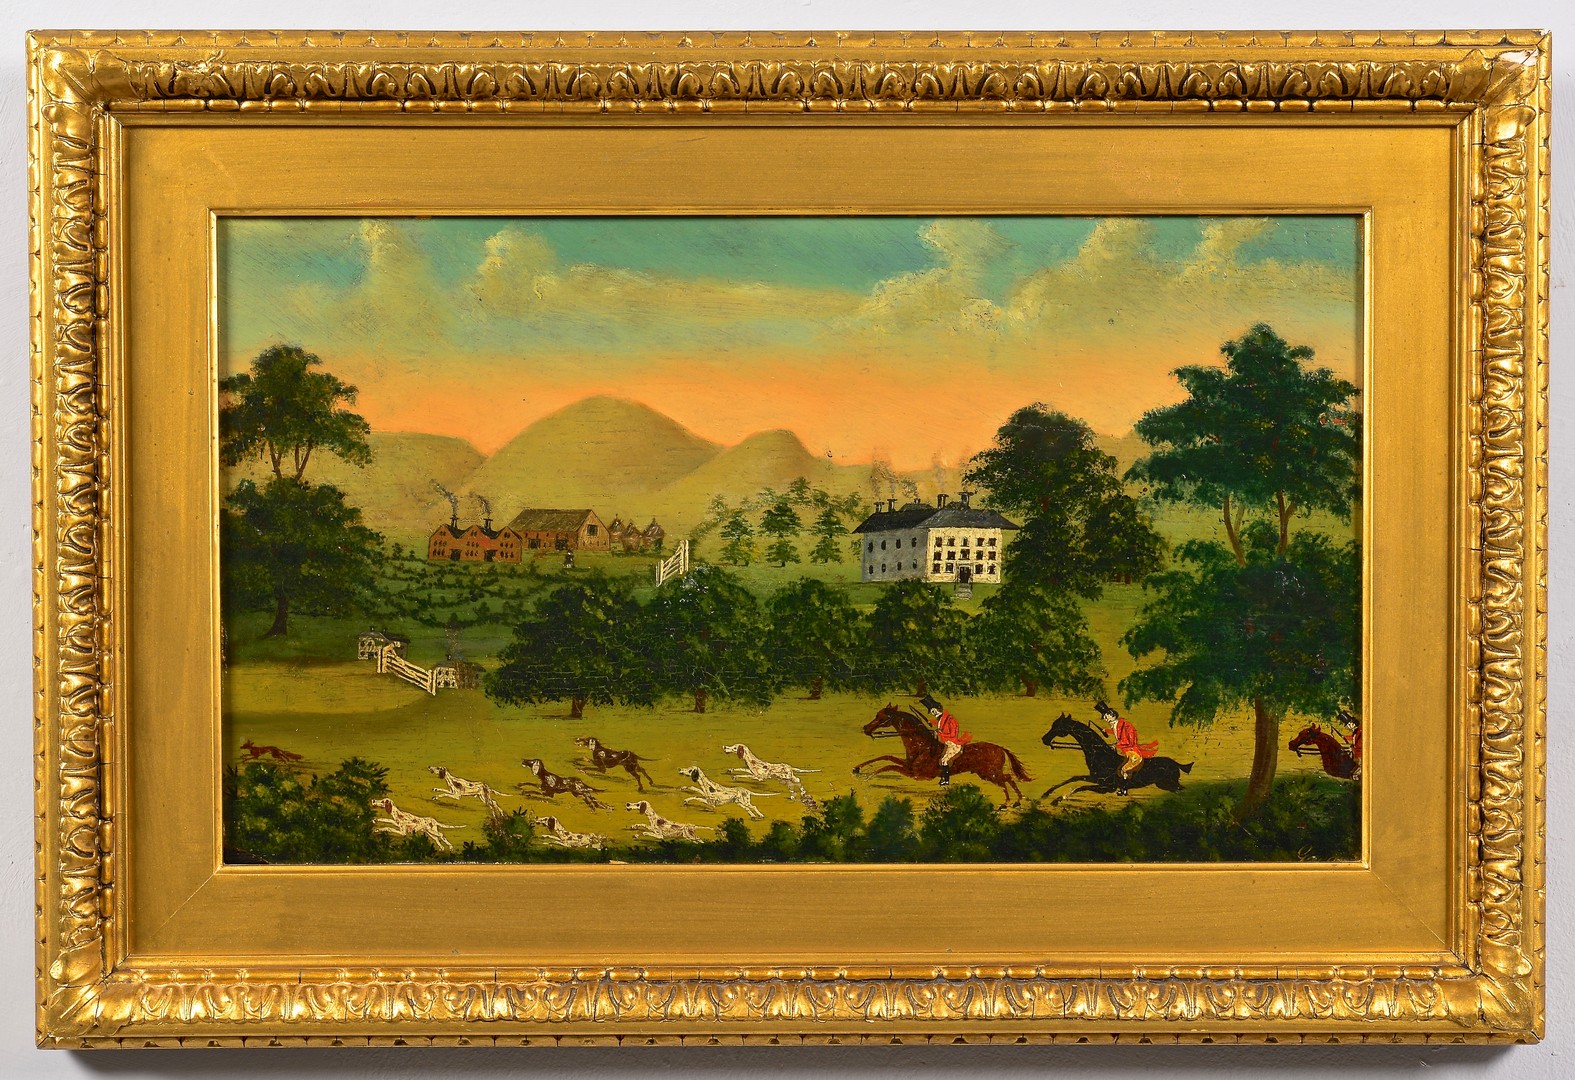 Lot 222: Pair Hunt Scene Paintings, Signed Gregory